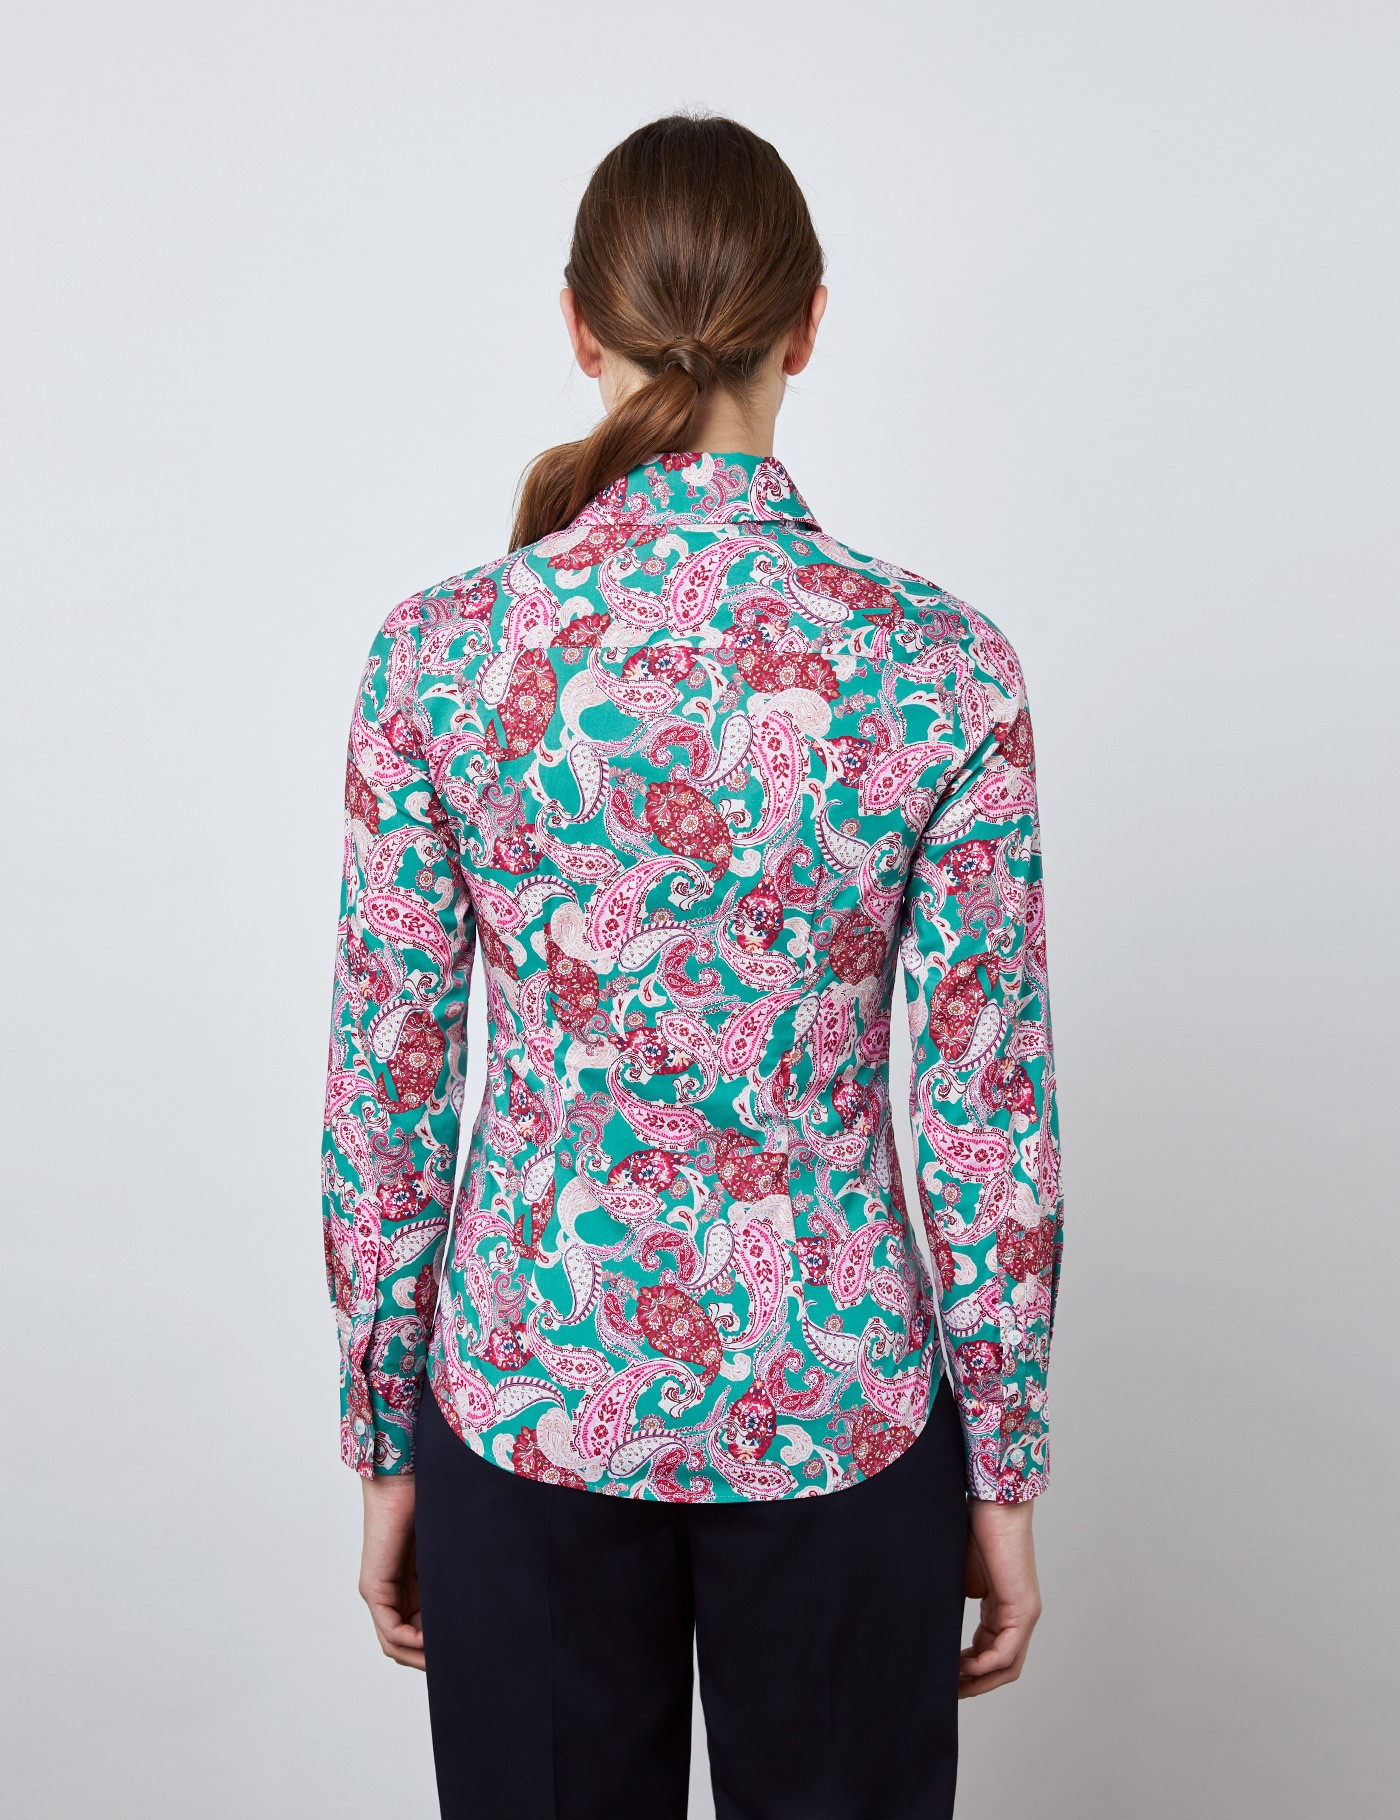 Women's Paisley Fitted Shirt with Vintage Collar in Green & Rusty Pink ...